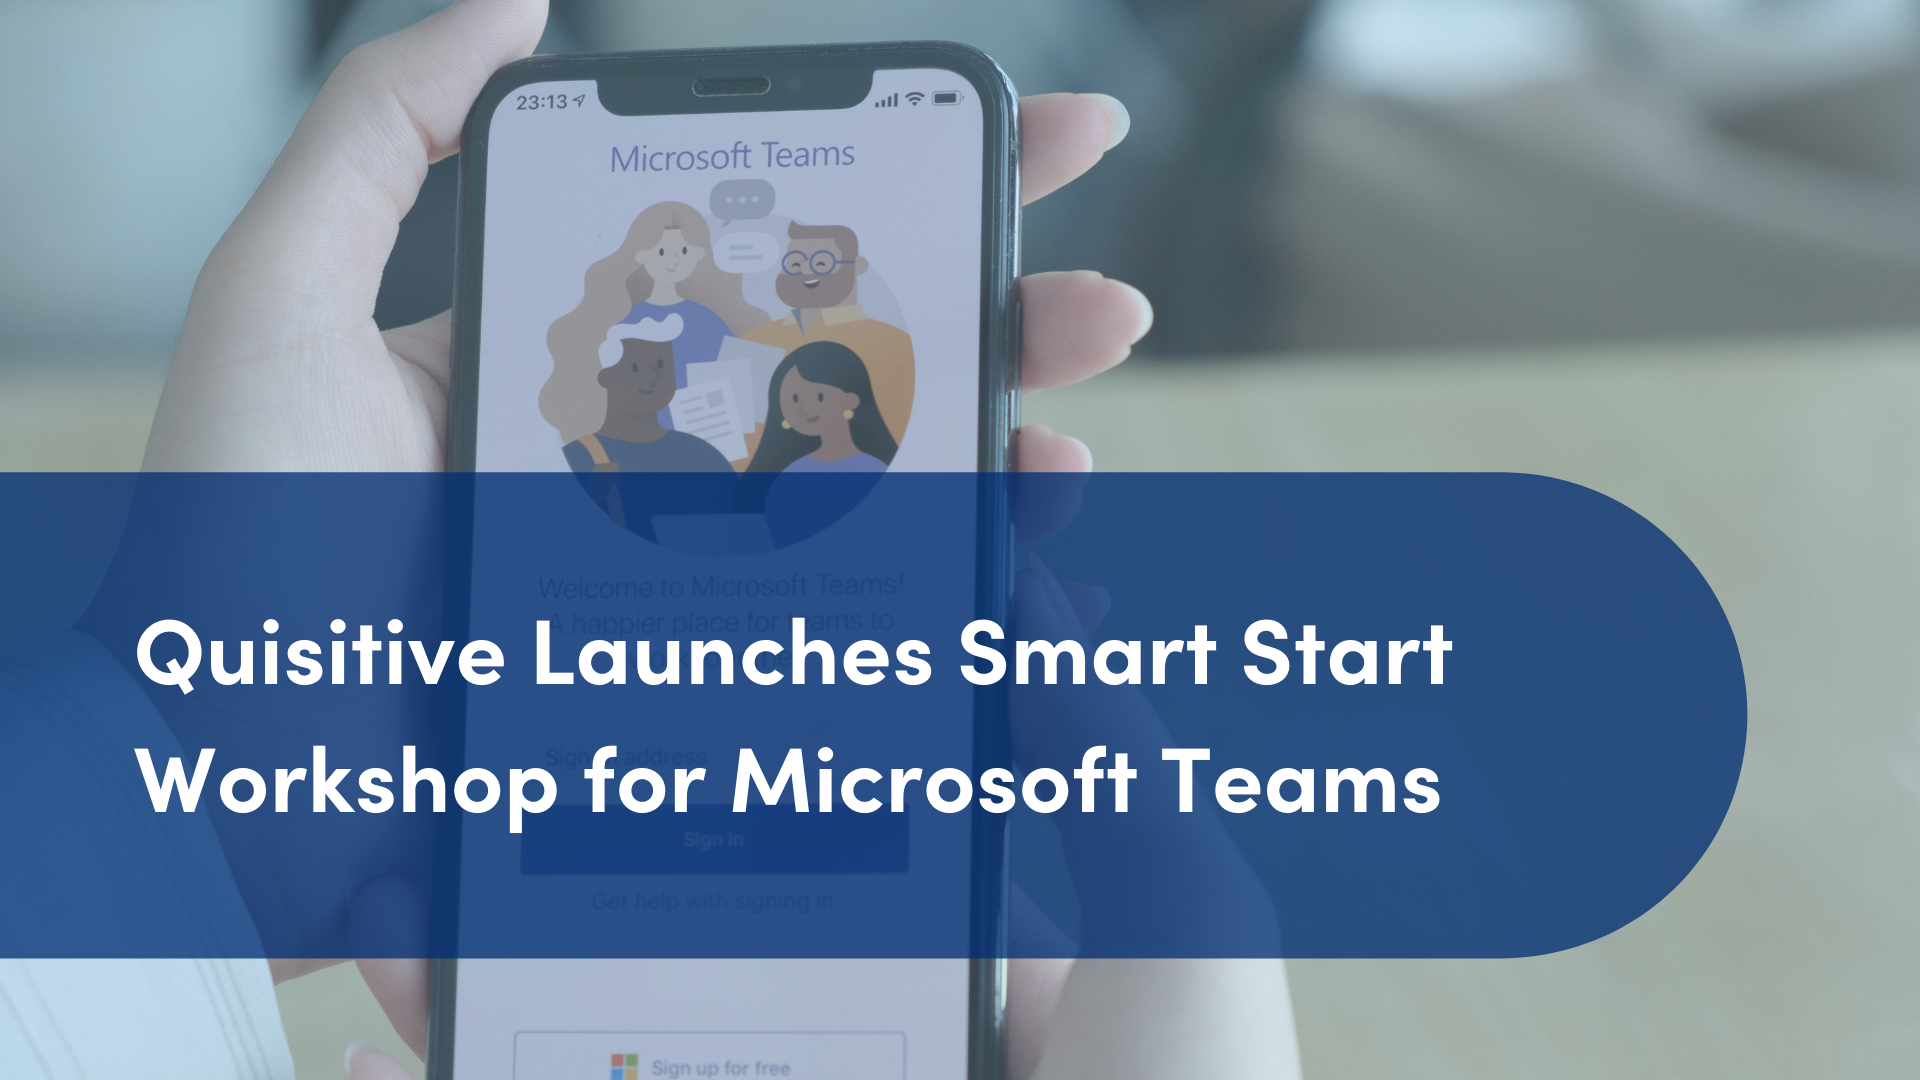 Image of phone with Microsoft Teams on screen with overlay of text "Quisitive launches smart start workshop for microsoft teams"